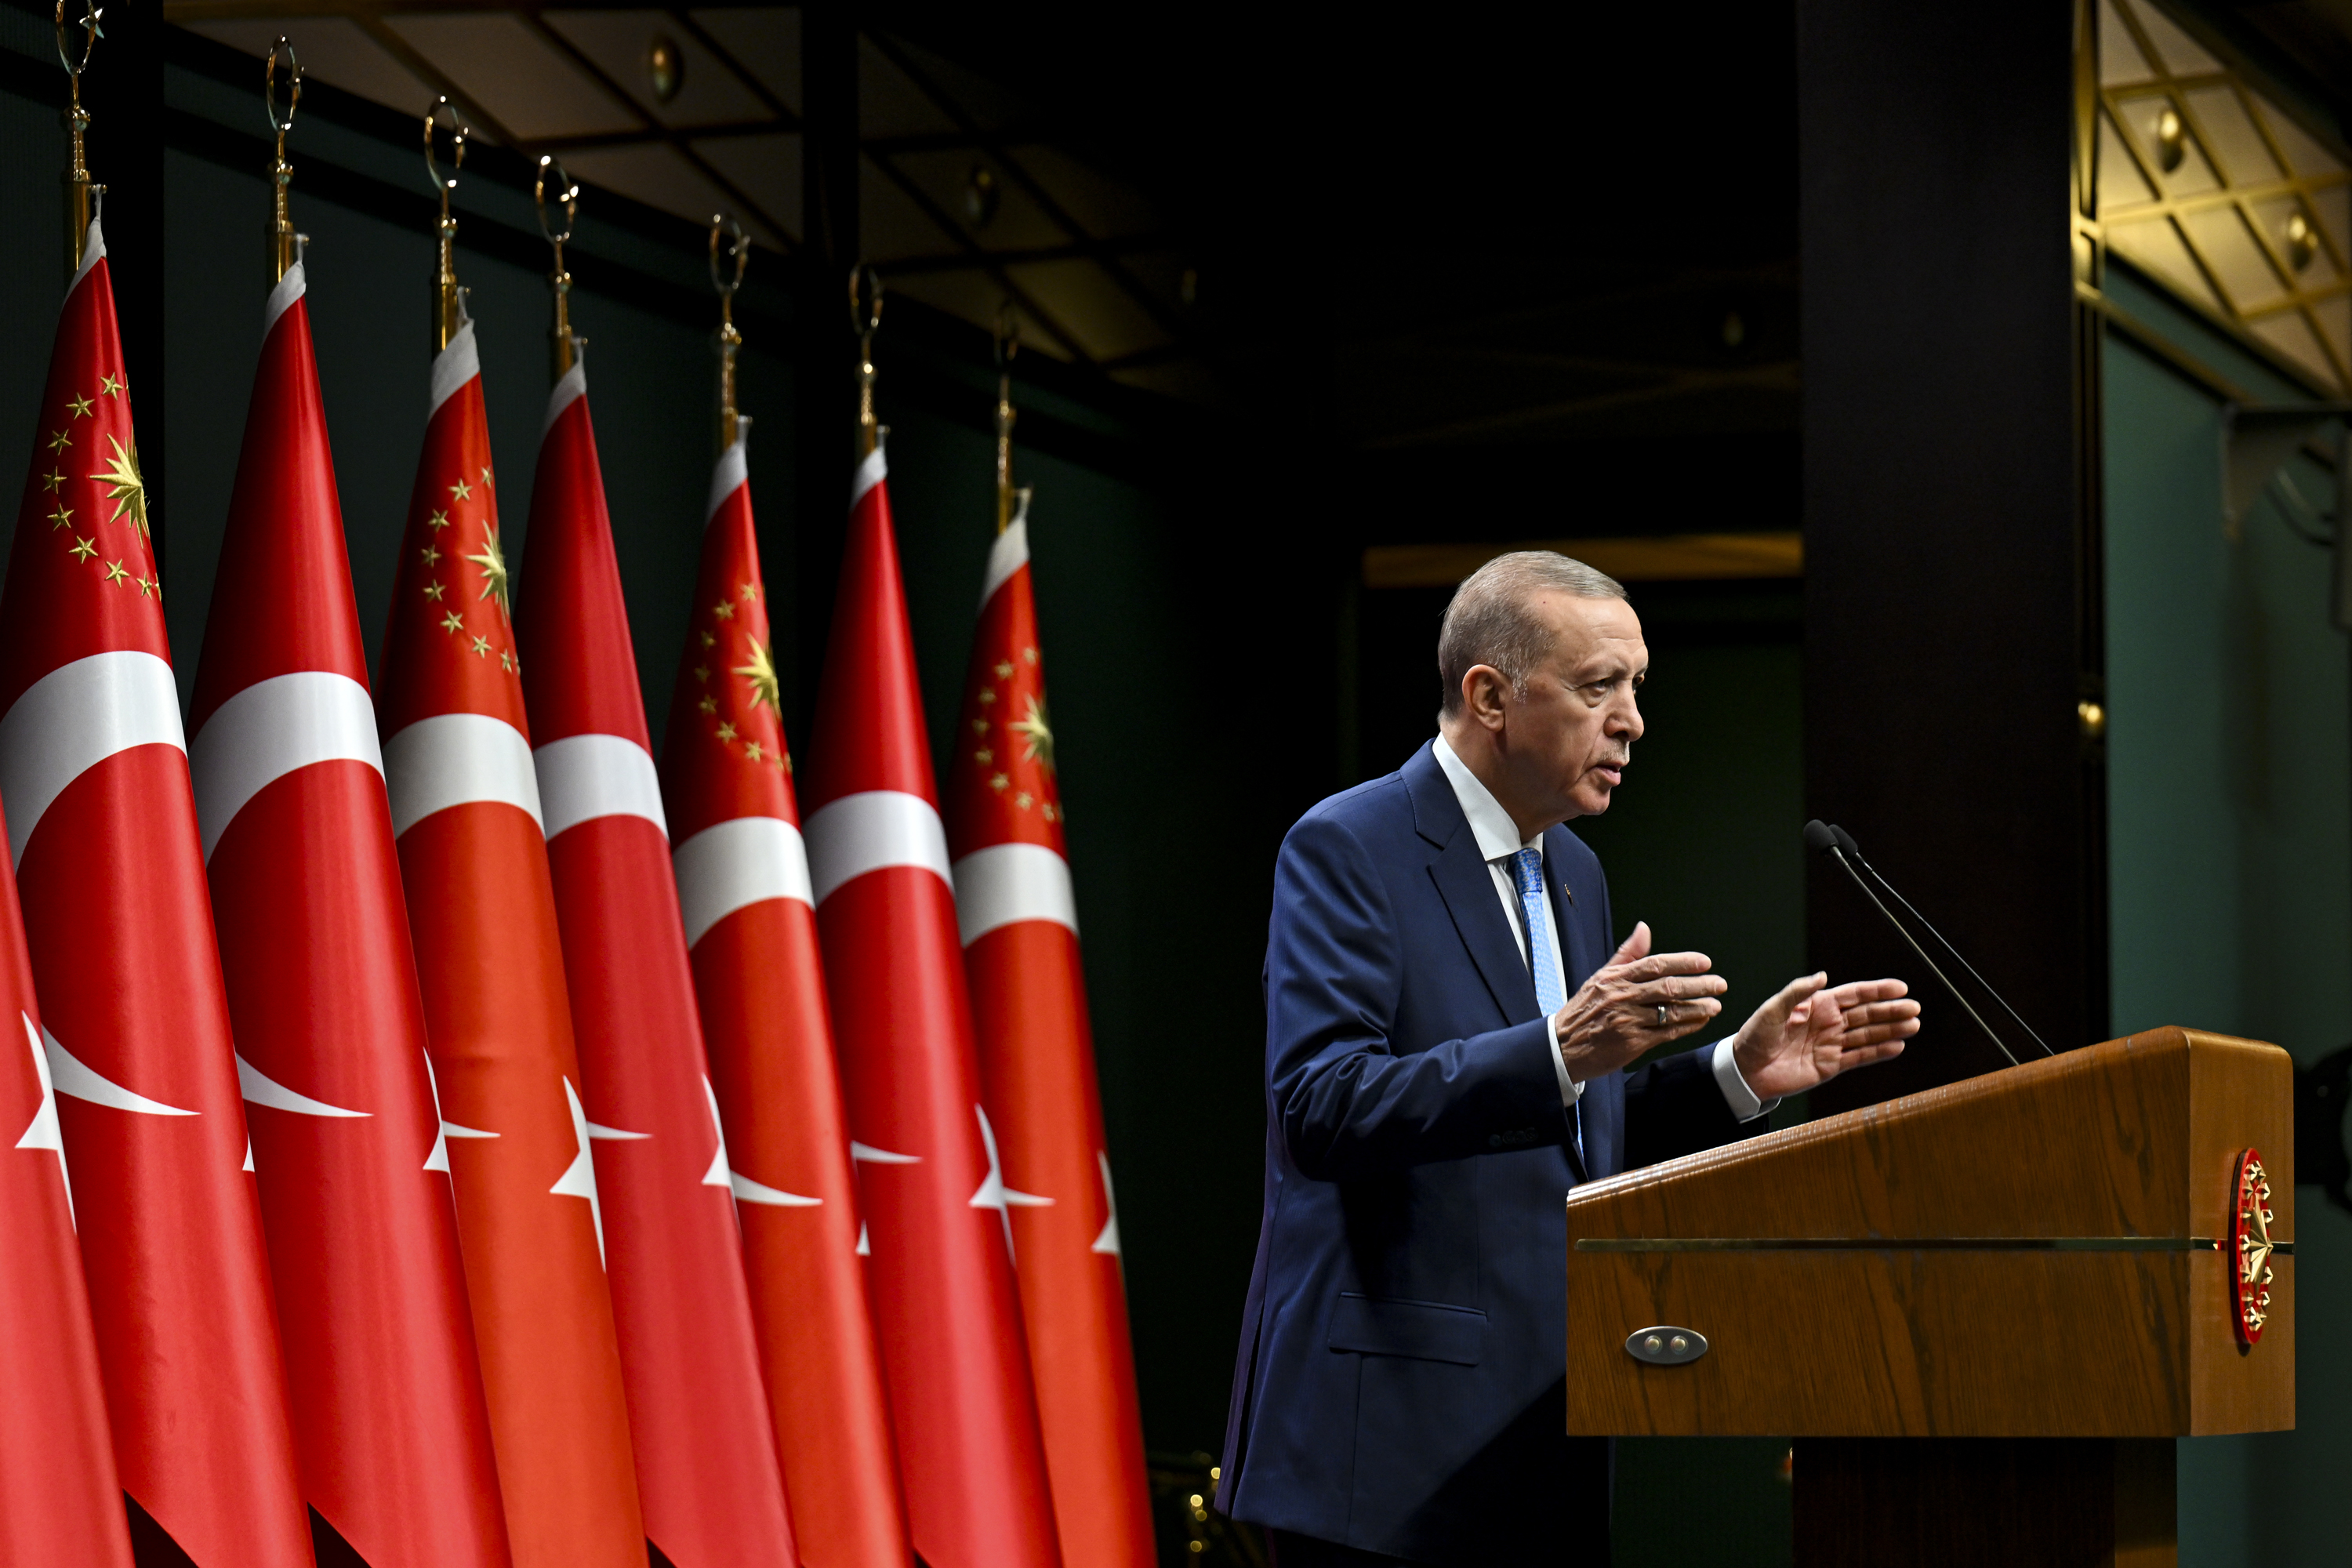 Turkish President Recep Tayyip Erdogan makes remarks following a cabinet meeting at the Presidential Complex in Ankara, Turkey, on October 31.